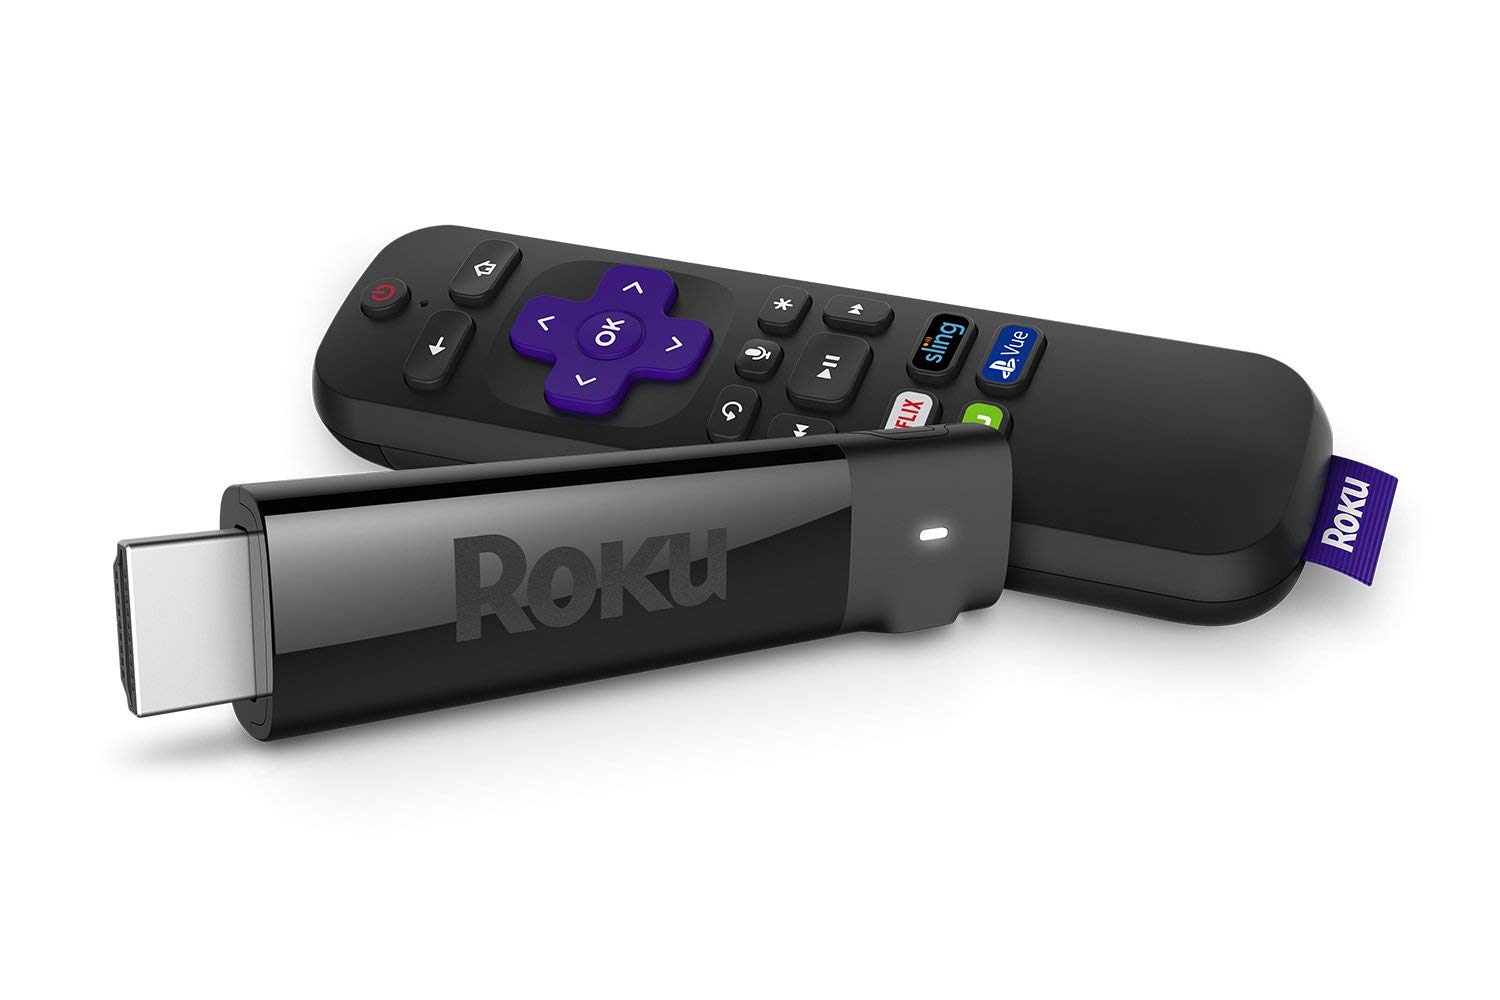 The Roku Stick+ Is on Sale with a $25 Sling TV Credit at Sam’s Club (Good for Current & New Sling TV Subscribers)